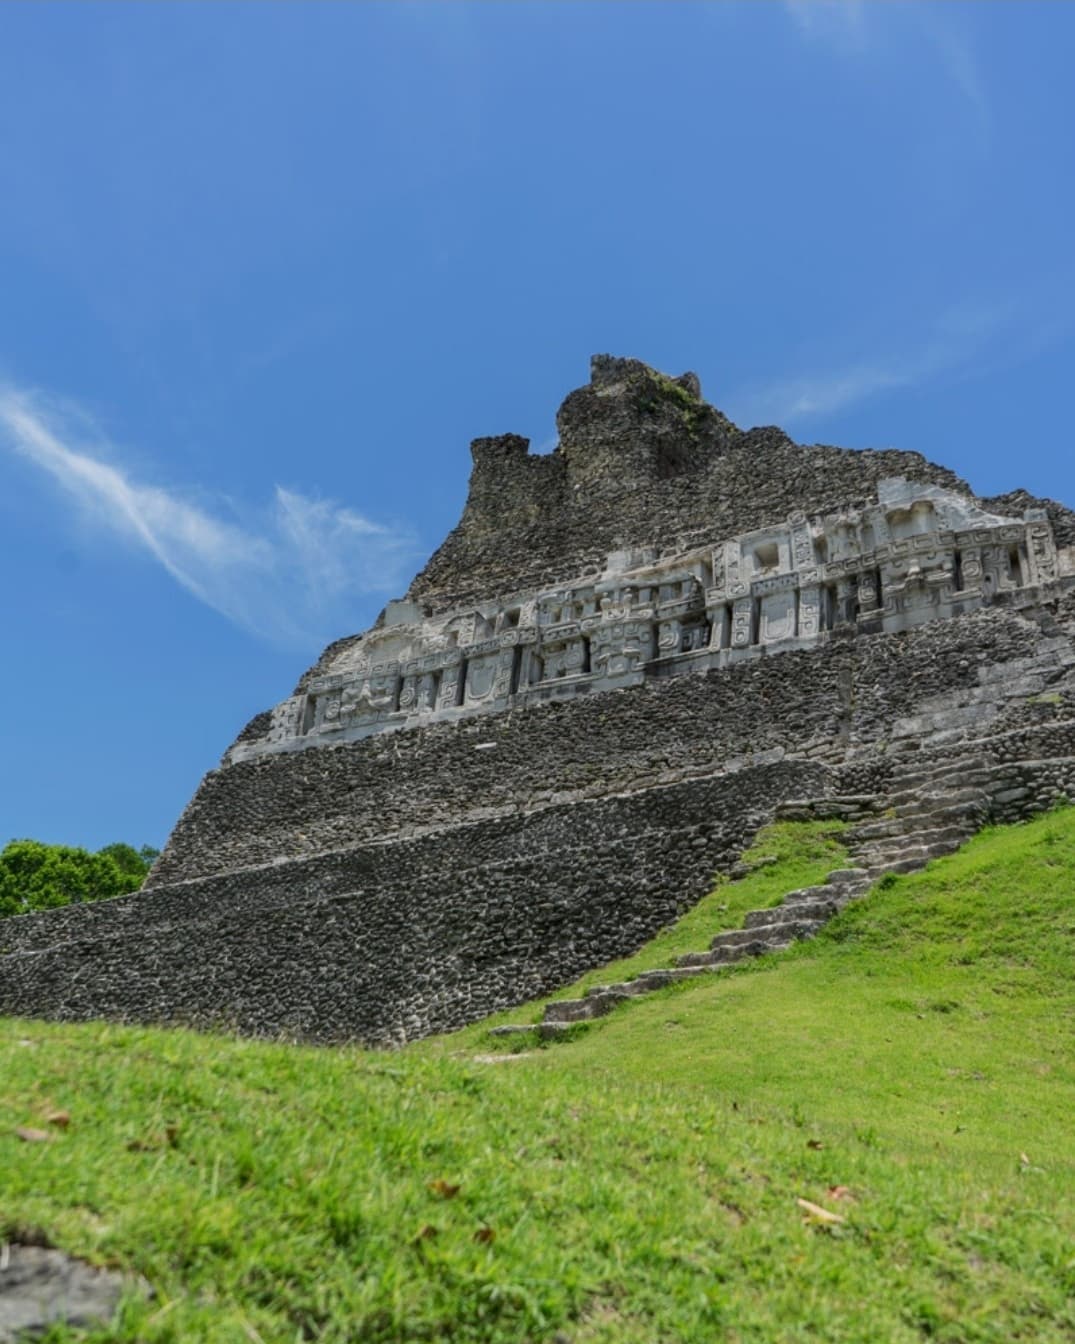 Xunantunich showing off today in all her glory. #travelbelize

????- @larubeya